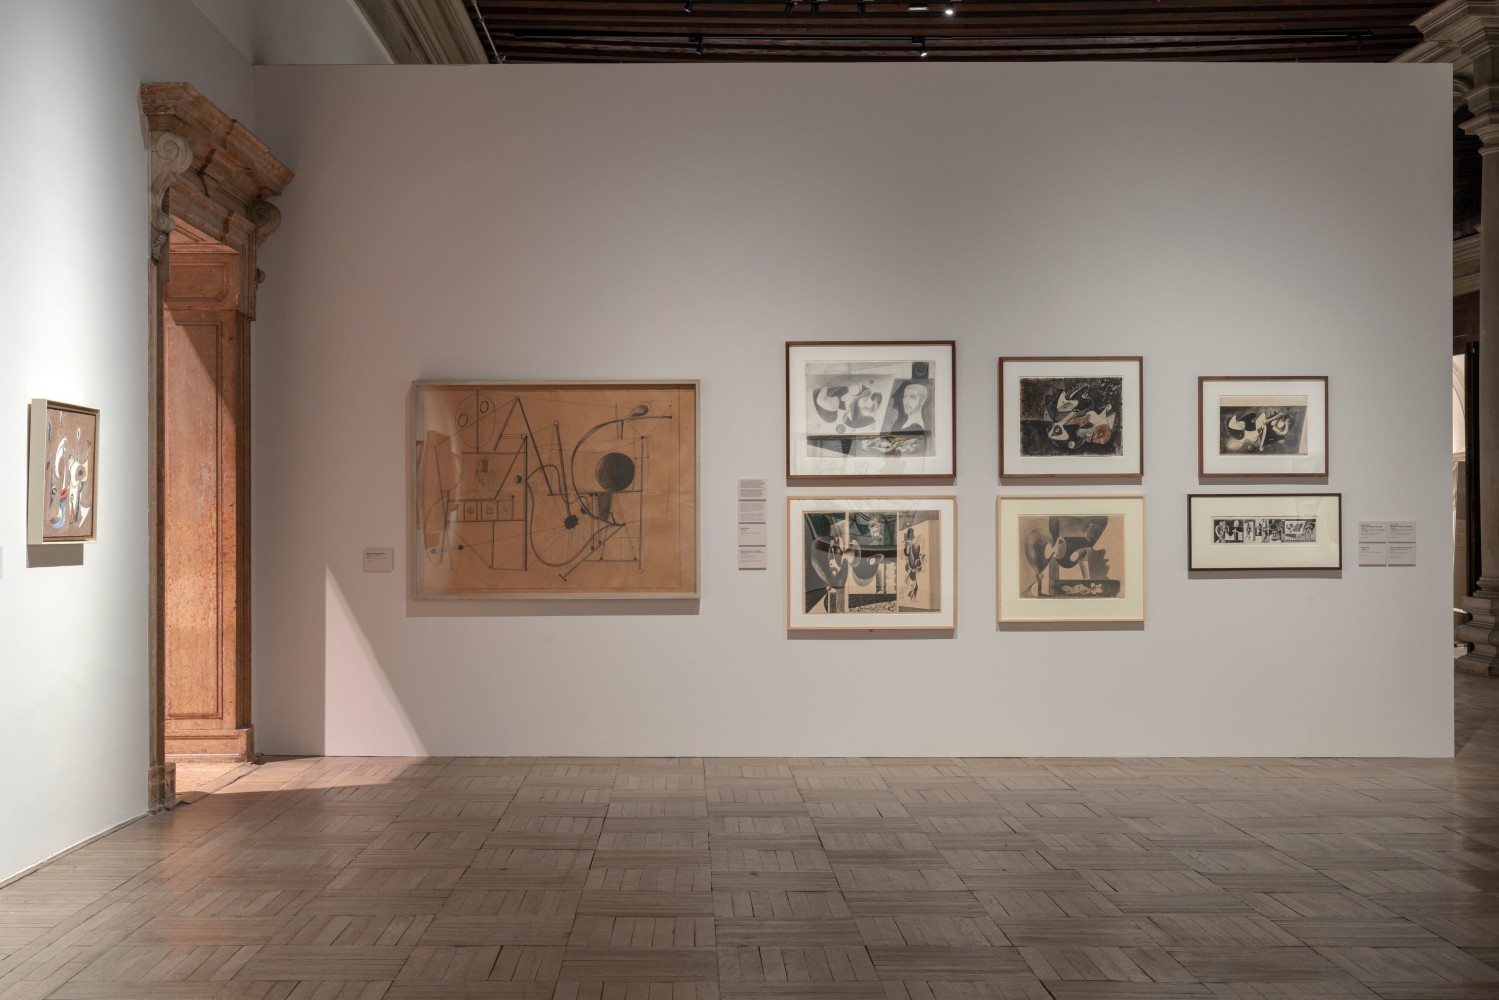 Installation photograph showing drawings by Gorky from the early 1930s